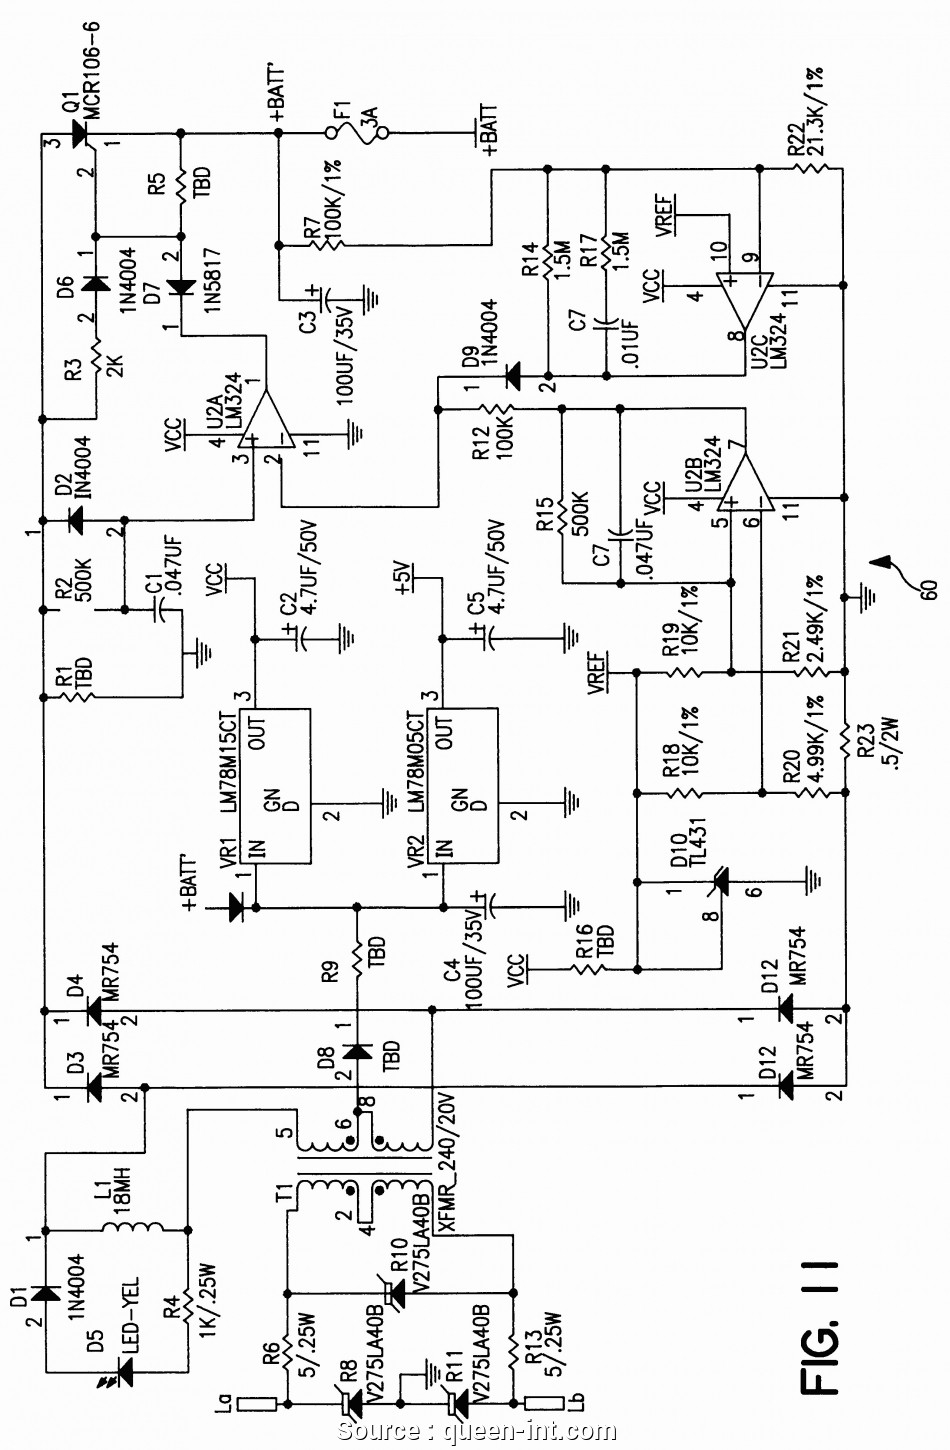 Reliance Generator Transfer Switch Wiring Diagram from 2020cadillac.com